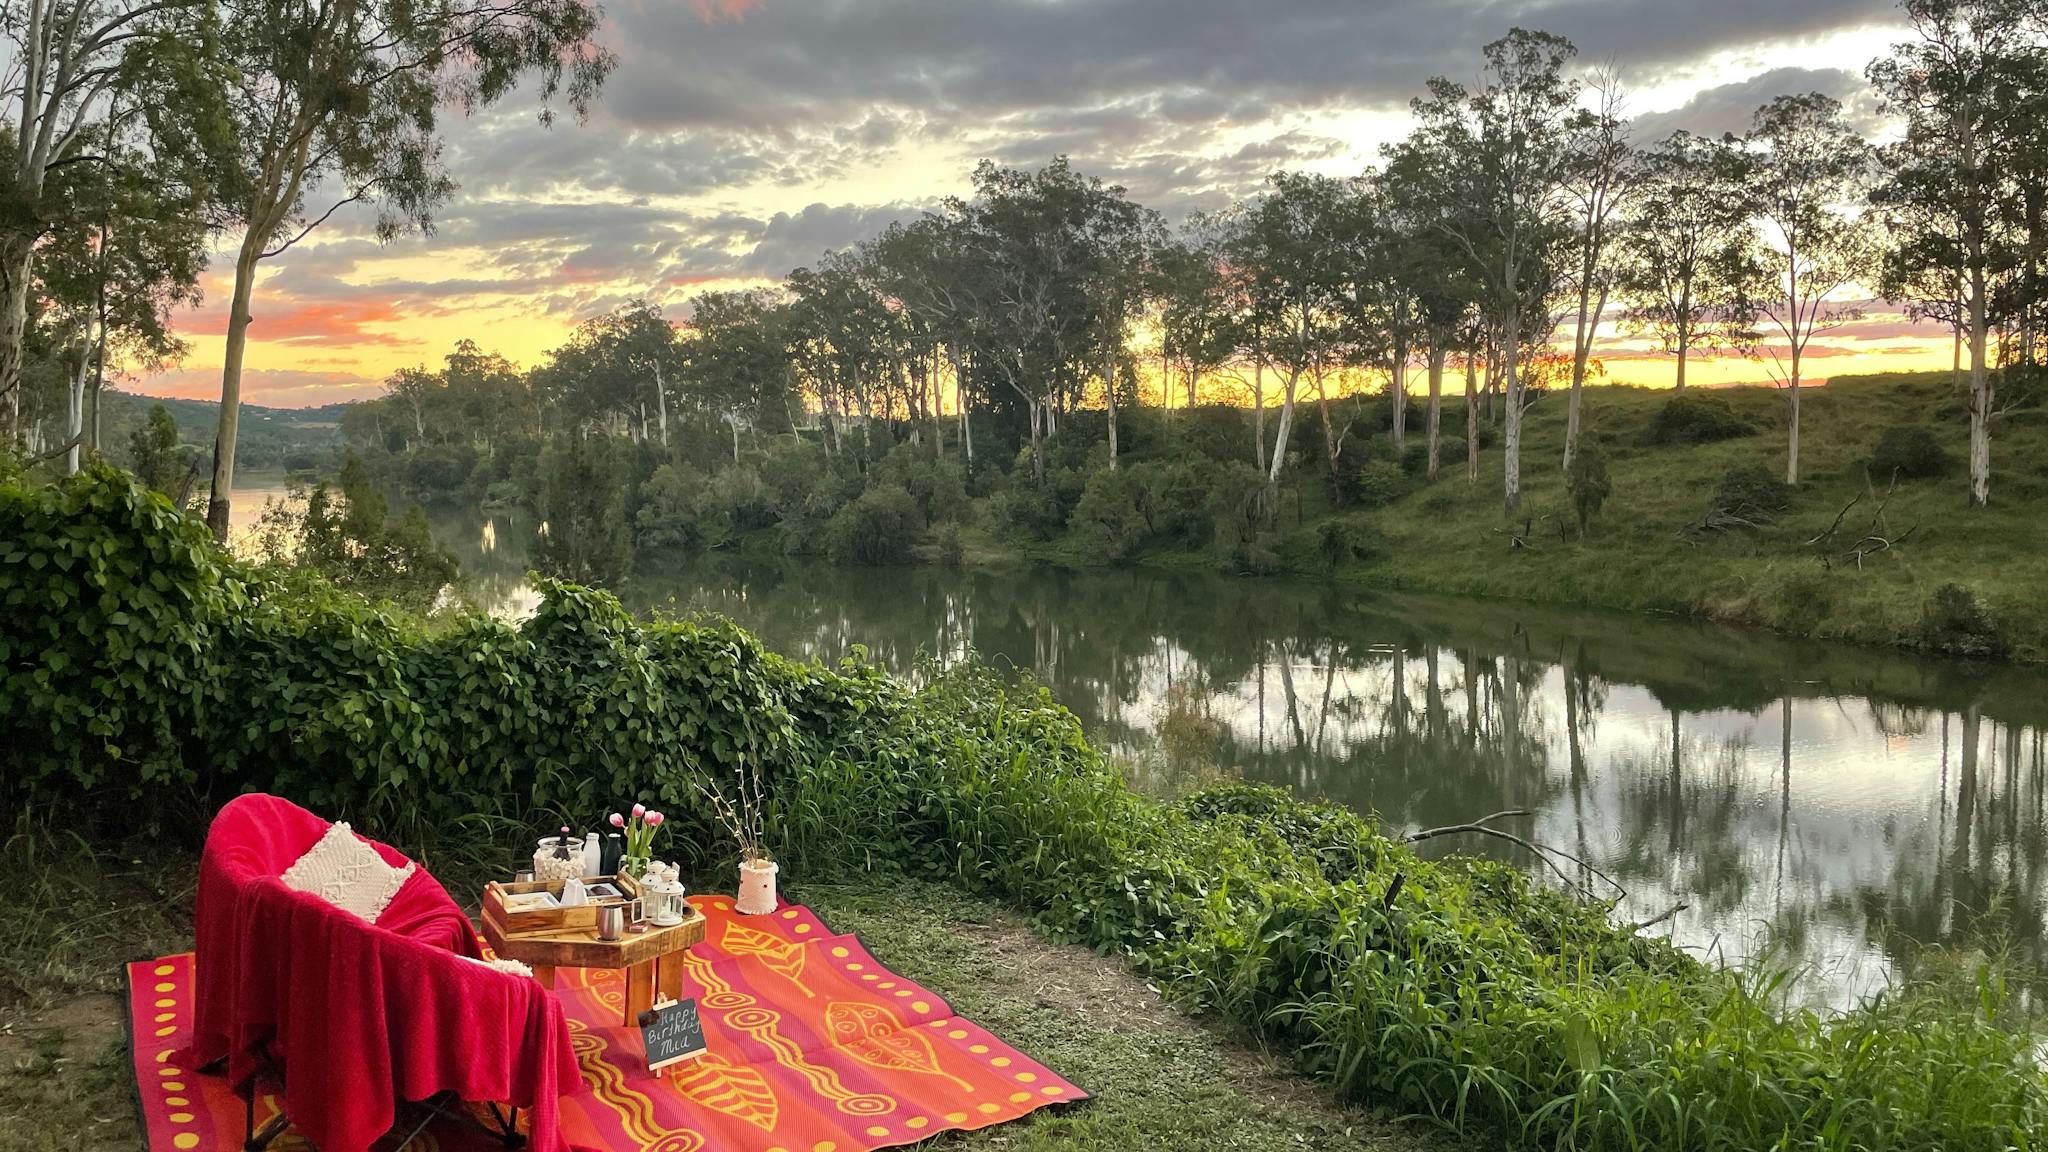 Picnic spot with rug, chairs and picnic with the sun setting over the river